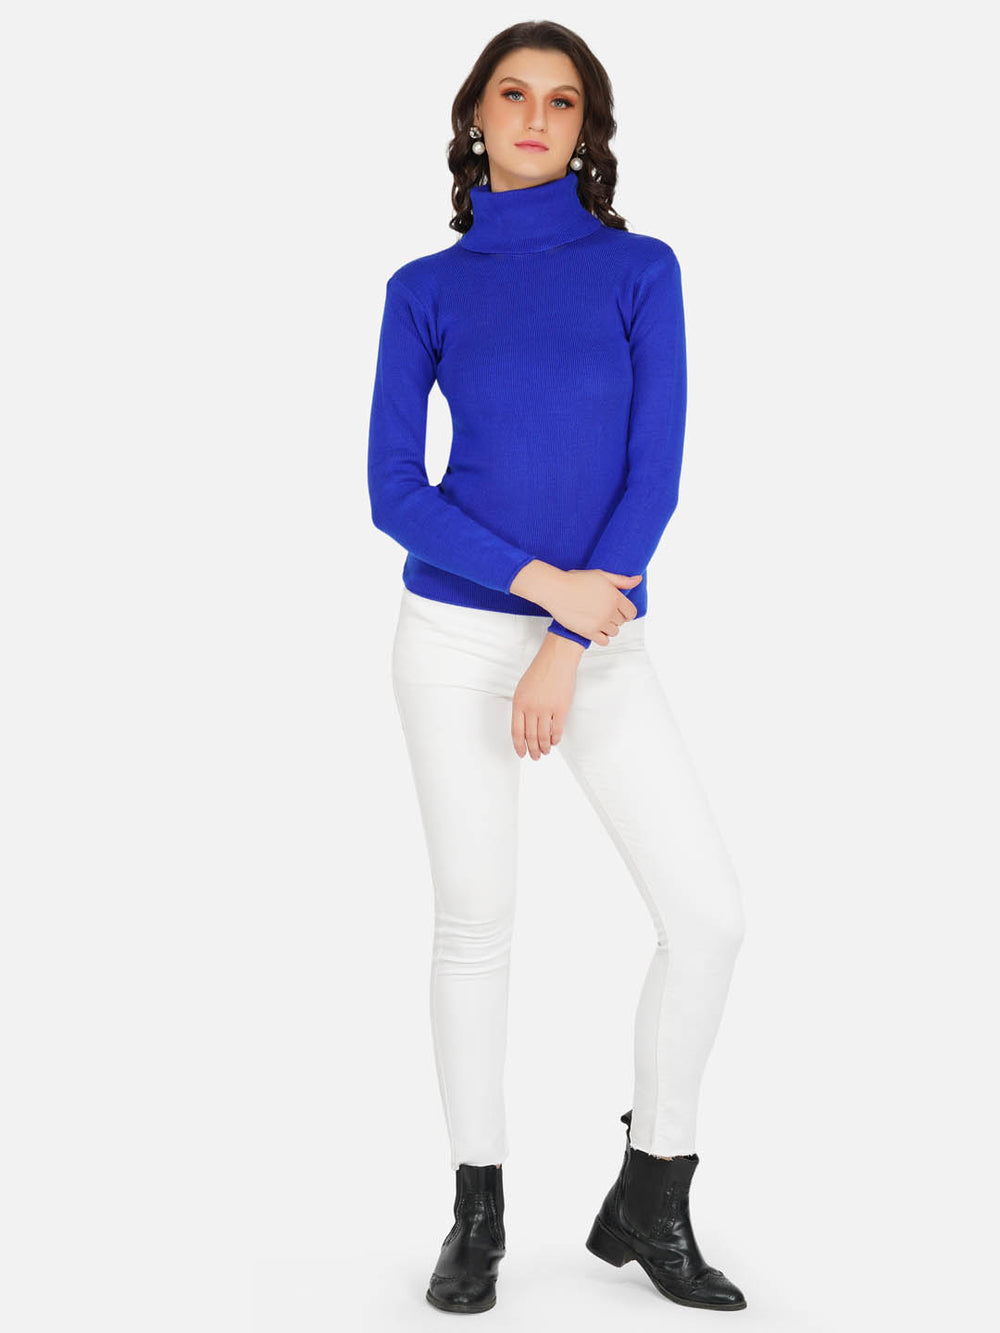 Blue Plain High Neck Knitted Sweater